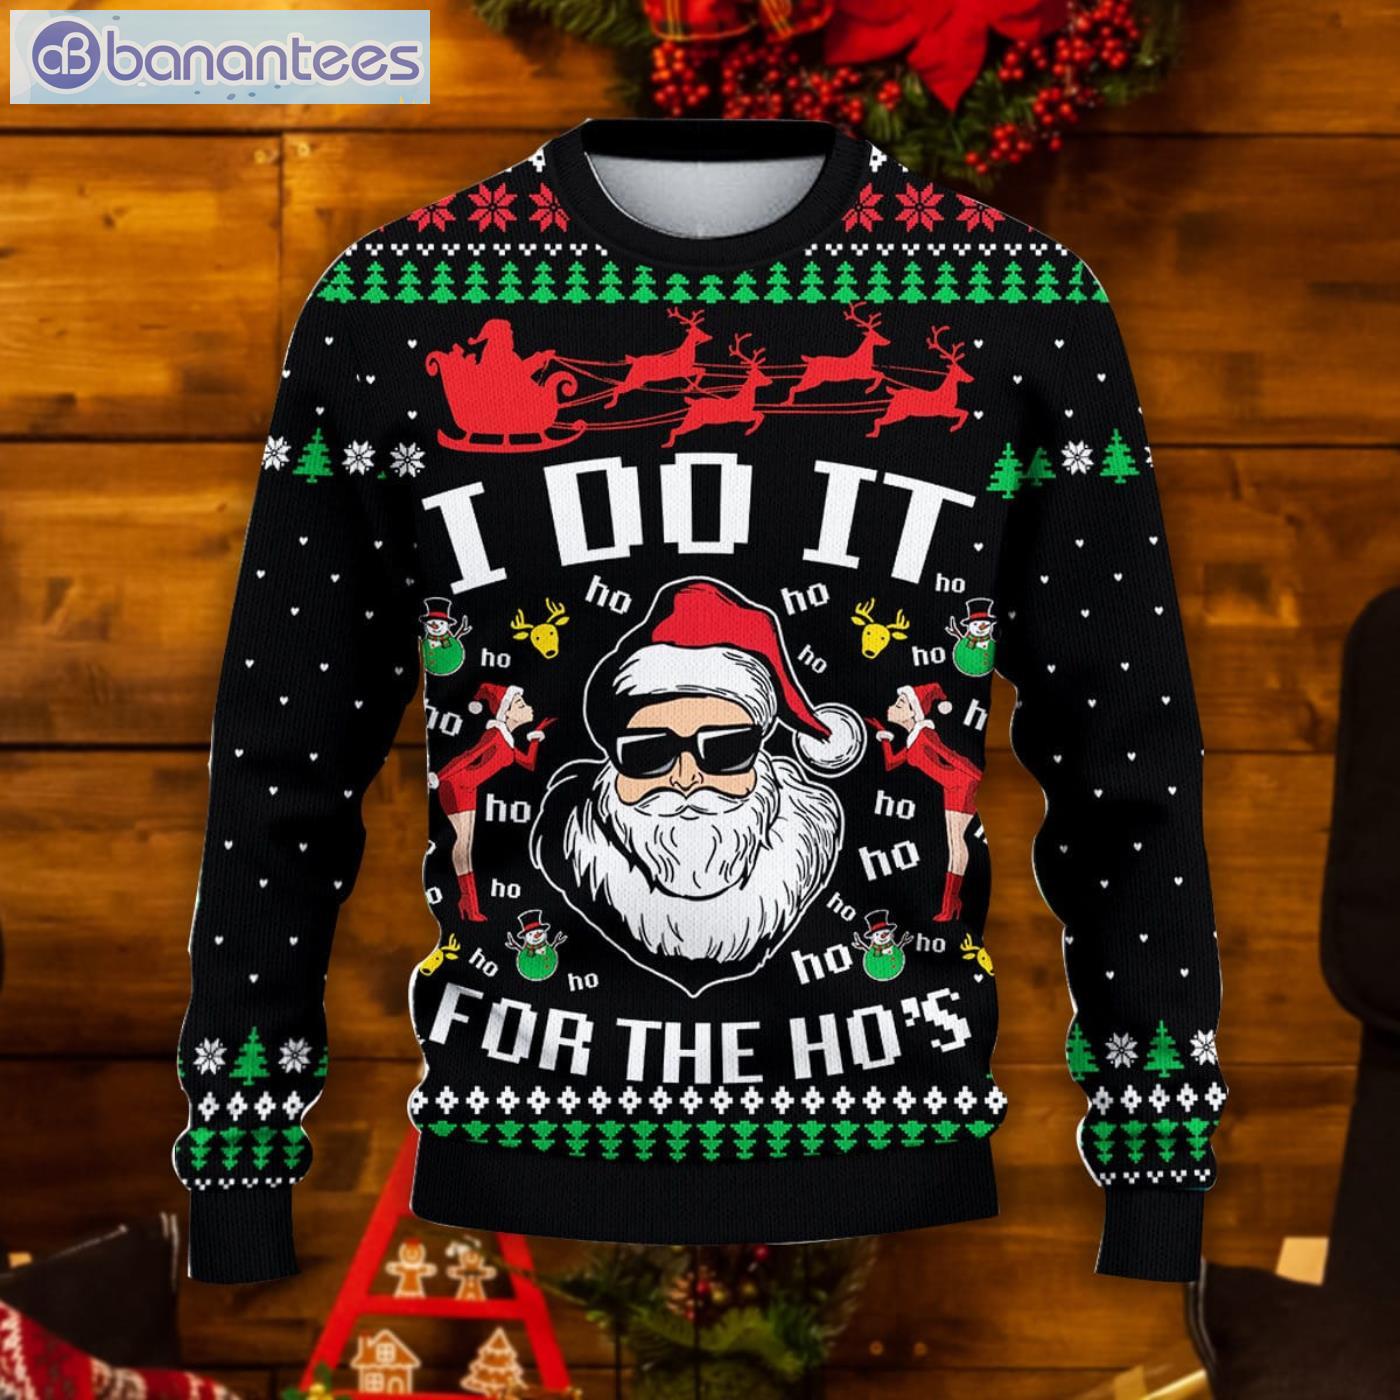 https://image.banantees.com/2022/10/santa-claus-i-do-it-for-the-hos-sweater-funny-ugly-christmas-sweater-1.jpg